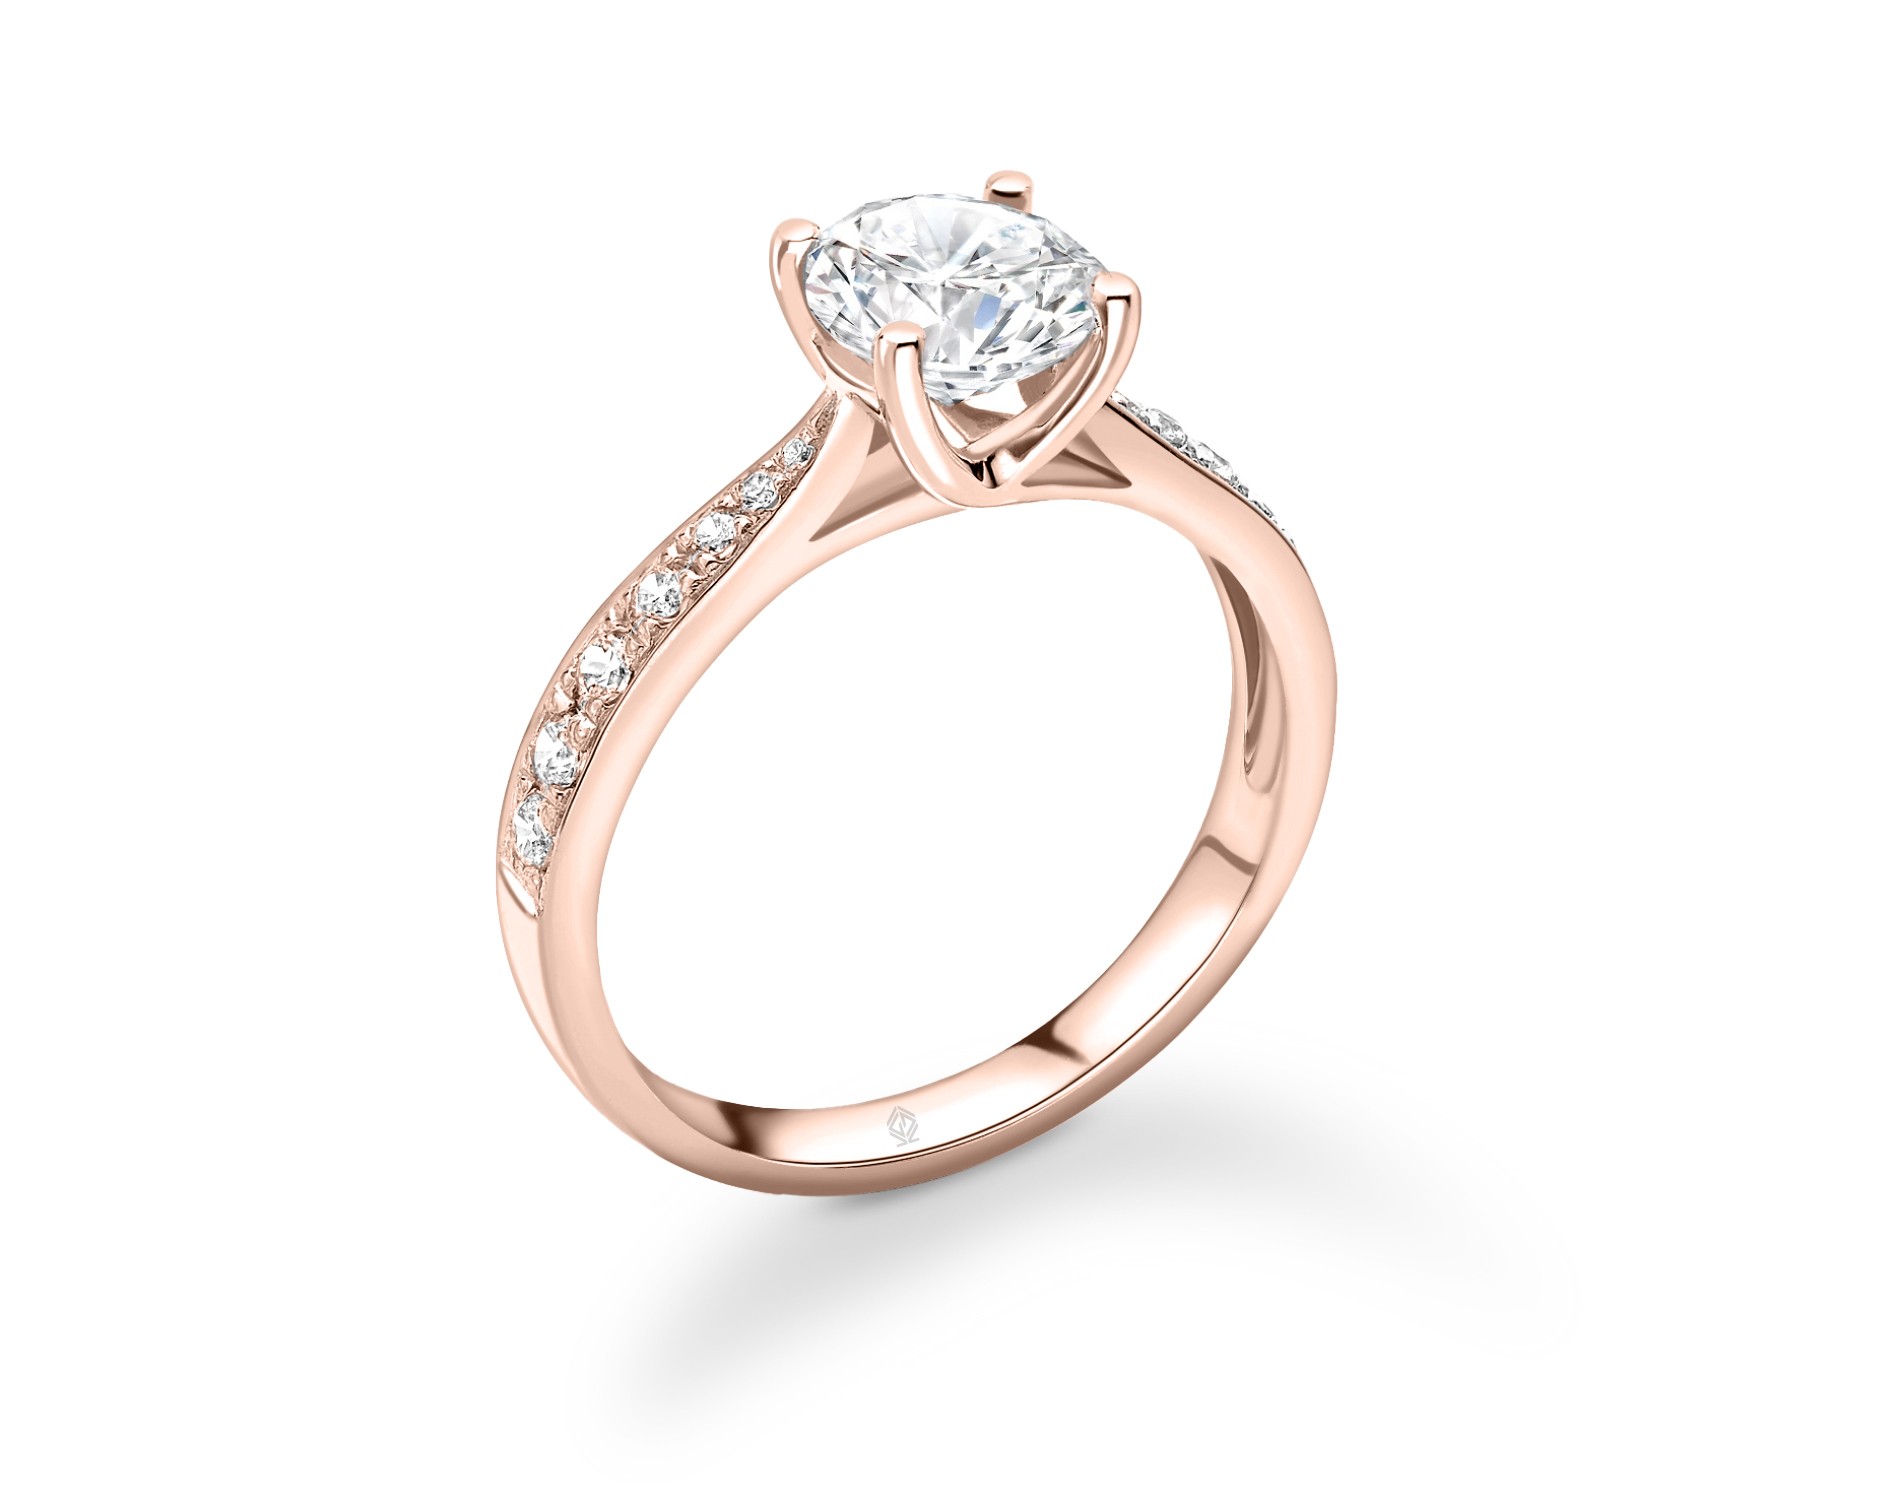 18K ROSE GOLD ROUND CUT 4 PRONGS DIAMOND ENGAGEMENT RING WITH SIDE STONES CHANNEL SET